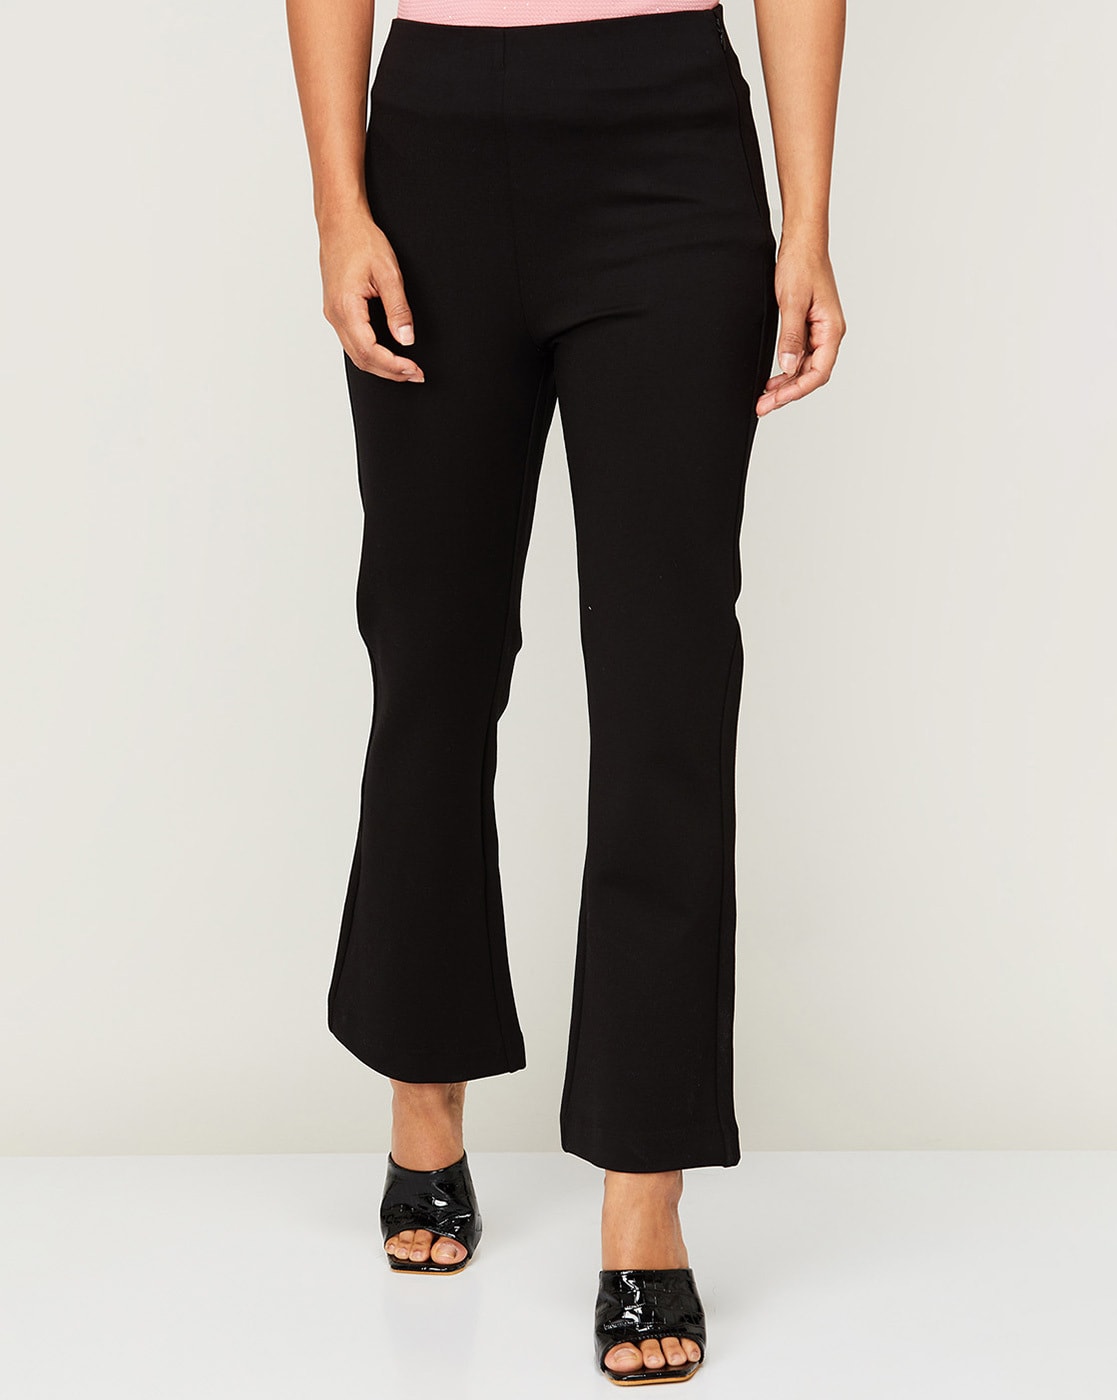 Buy ALLEN SOLLY Black Womens Solid Formal Trousers  Shoppers Stop